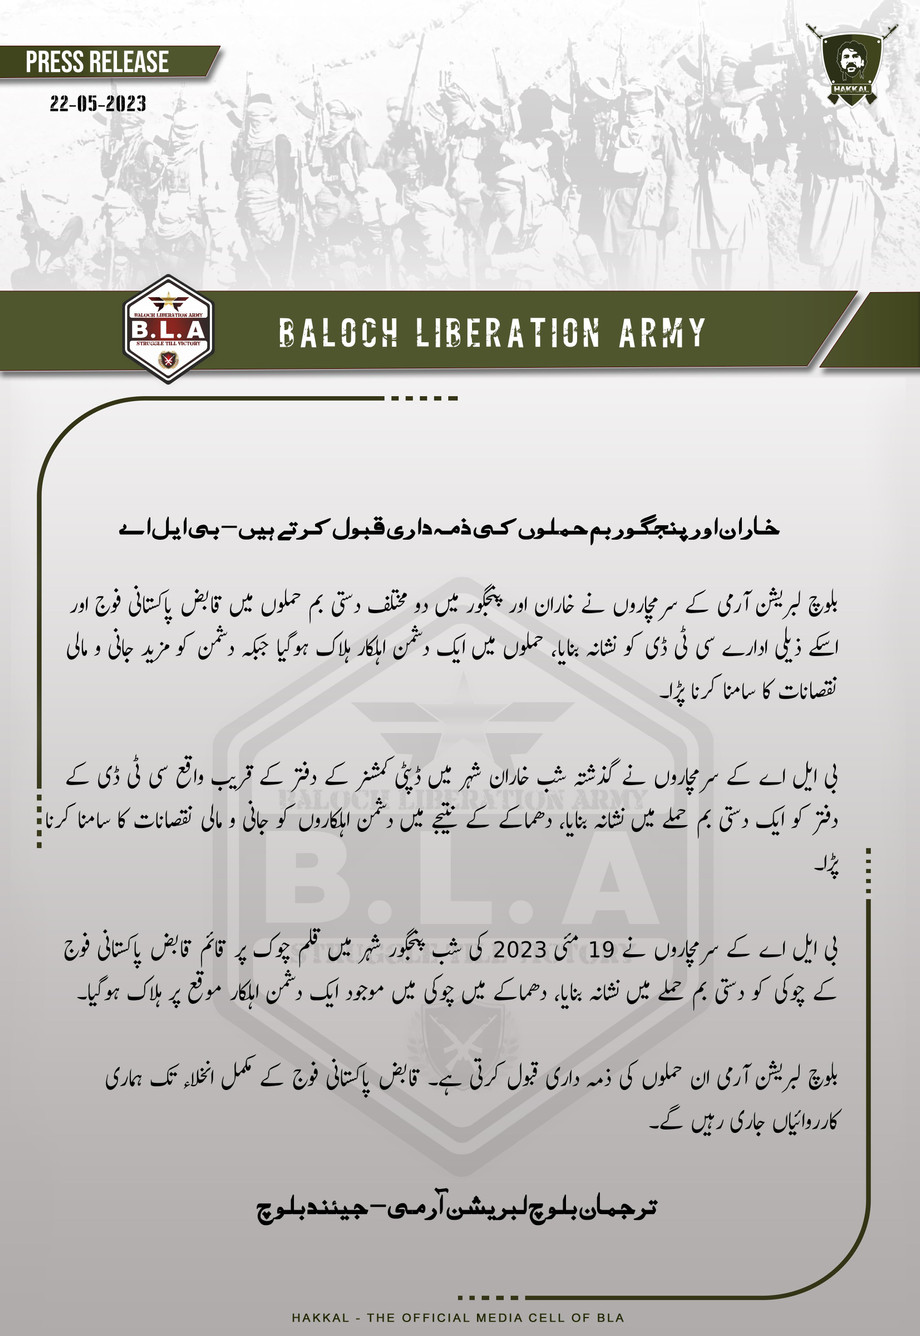 (Claim) Baloch Liberation Army (BLA) Militants Targeted the Army & Counter Terrorism Department (CTD) Office with Grenades in Panjgur and Kharan, Balochistan, Pakistan – 22 May 2023